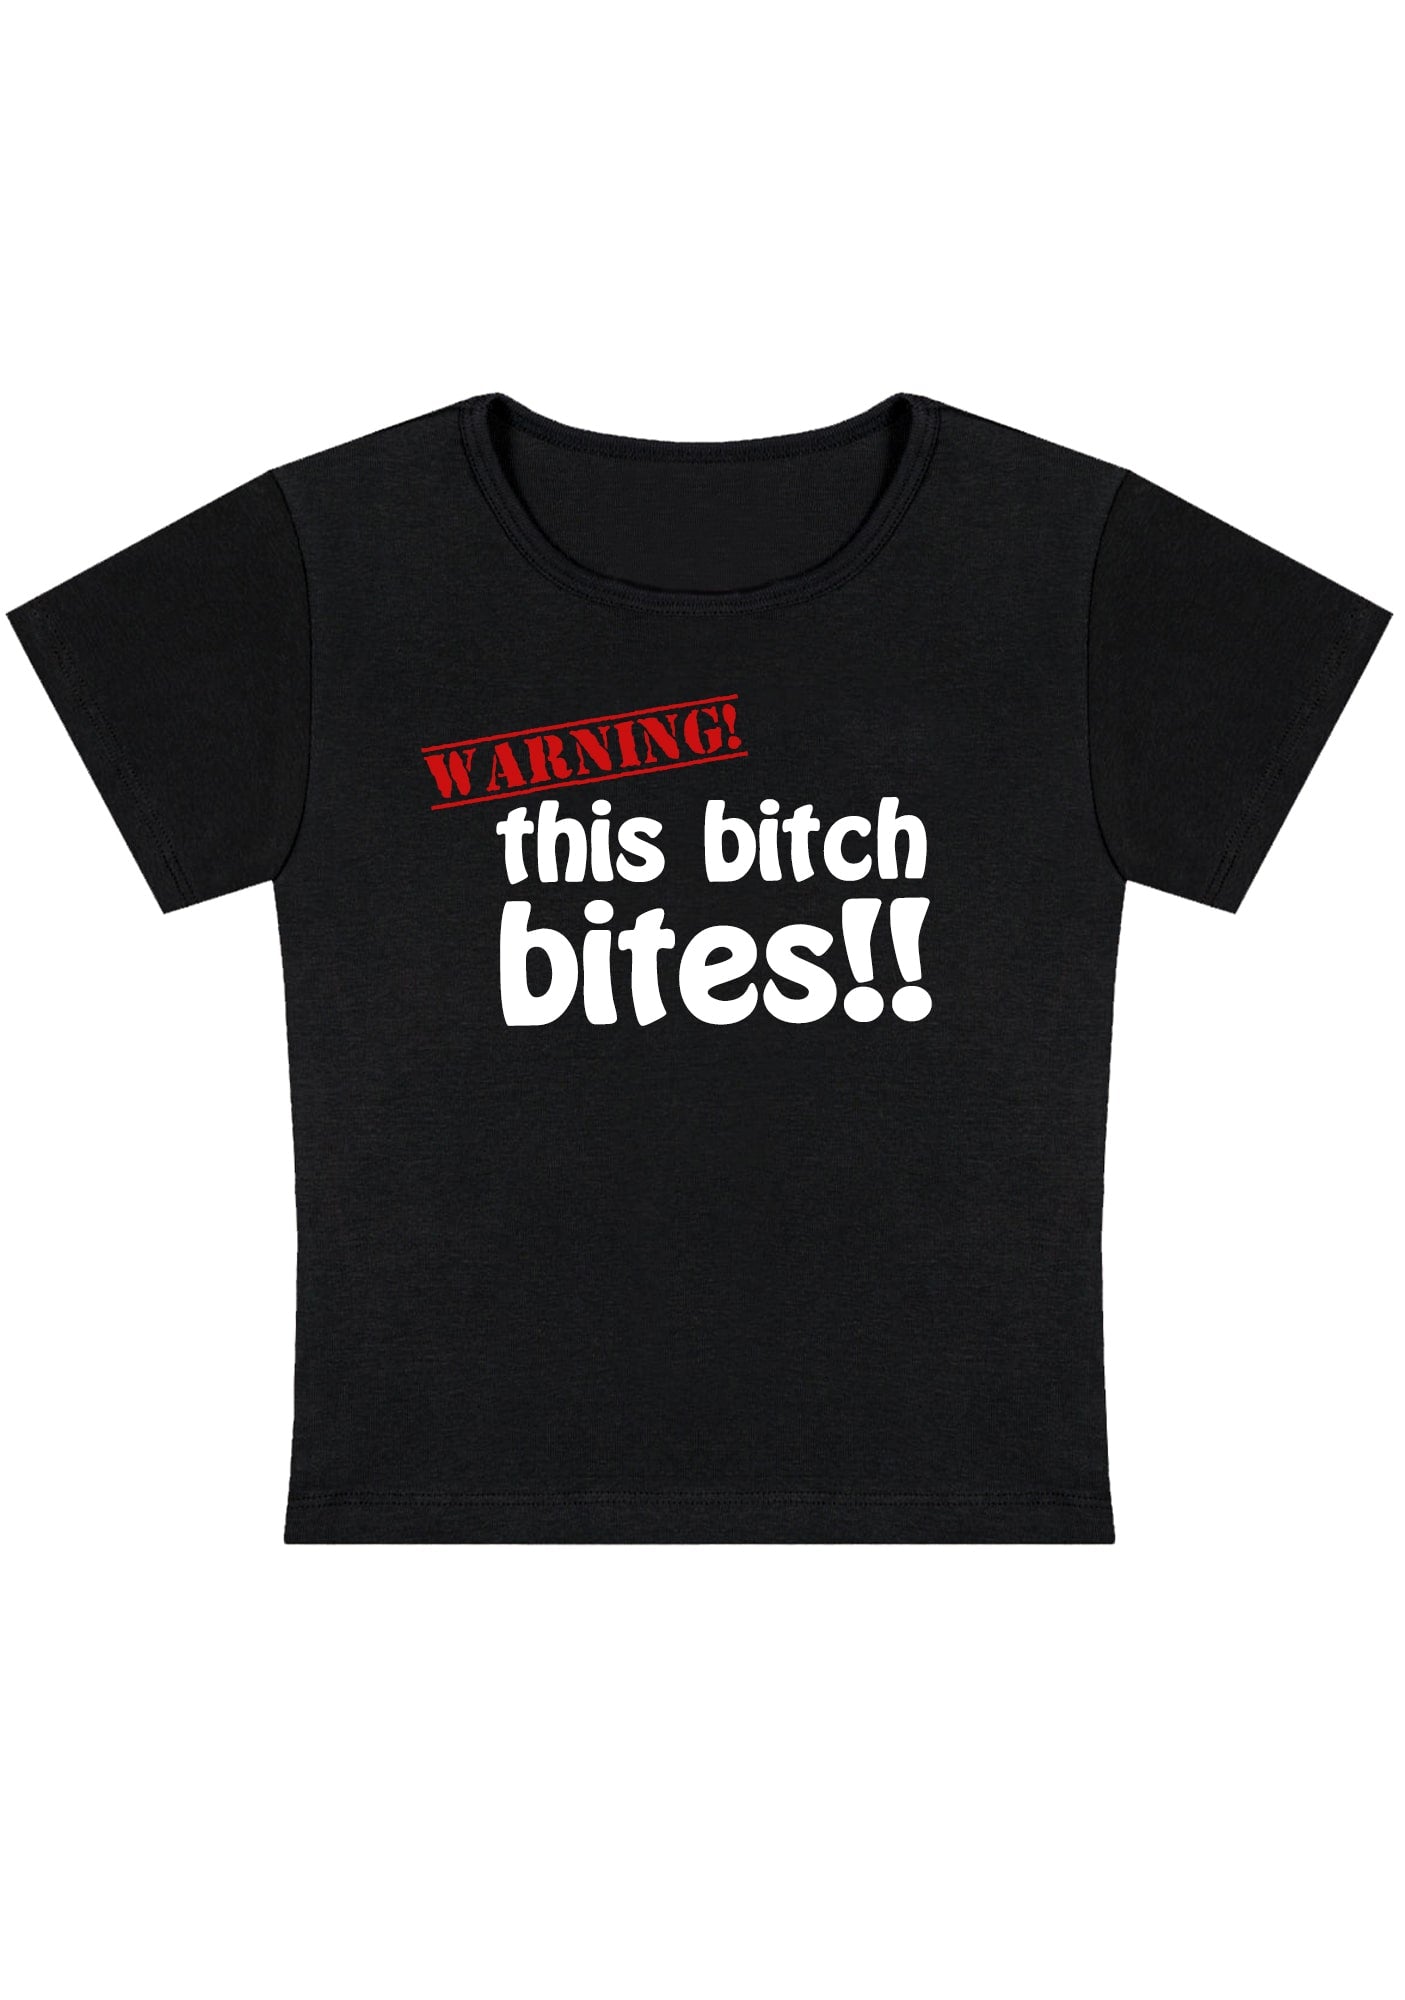 This Bxtch Bites Y2K Baby Tee